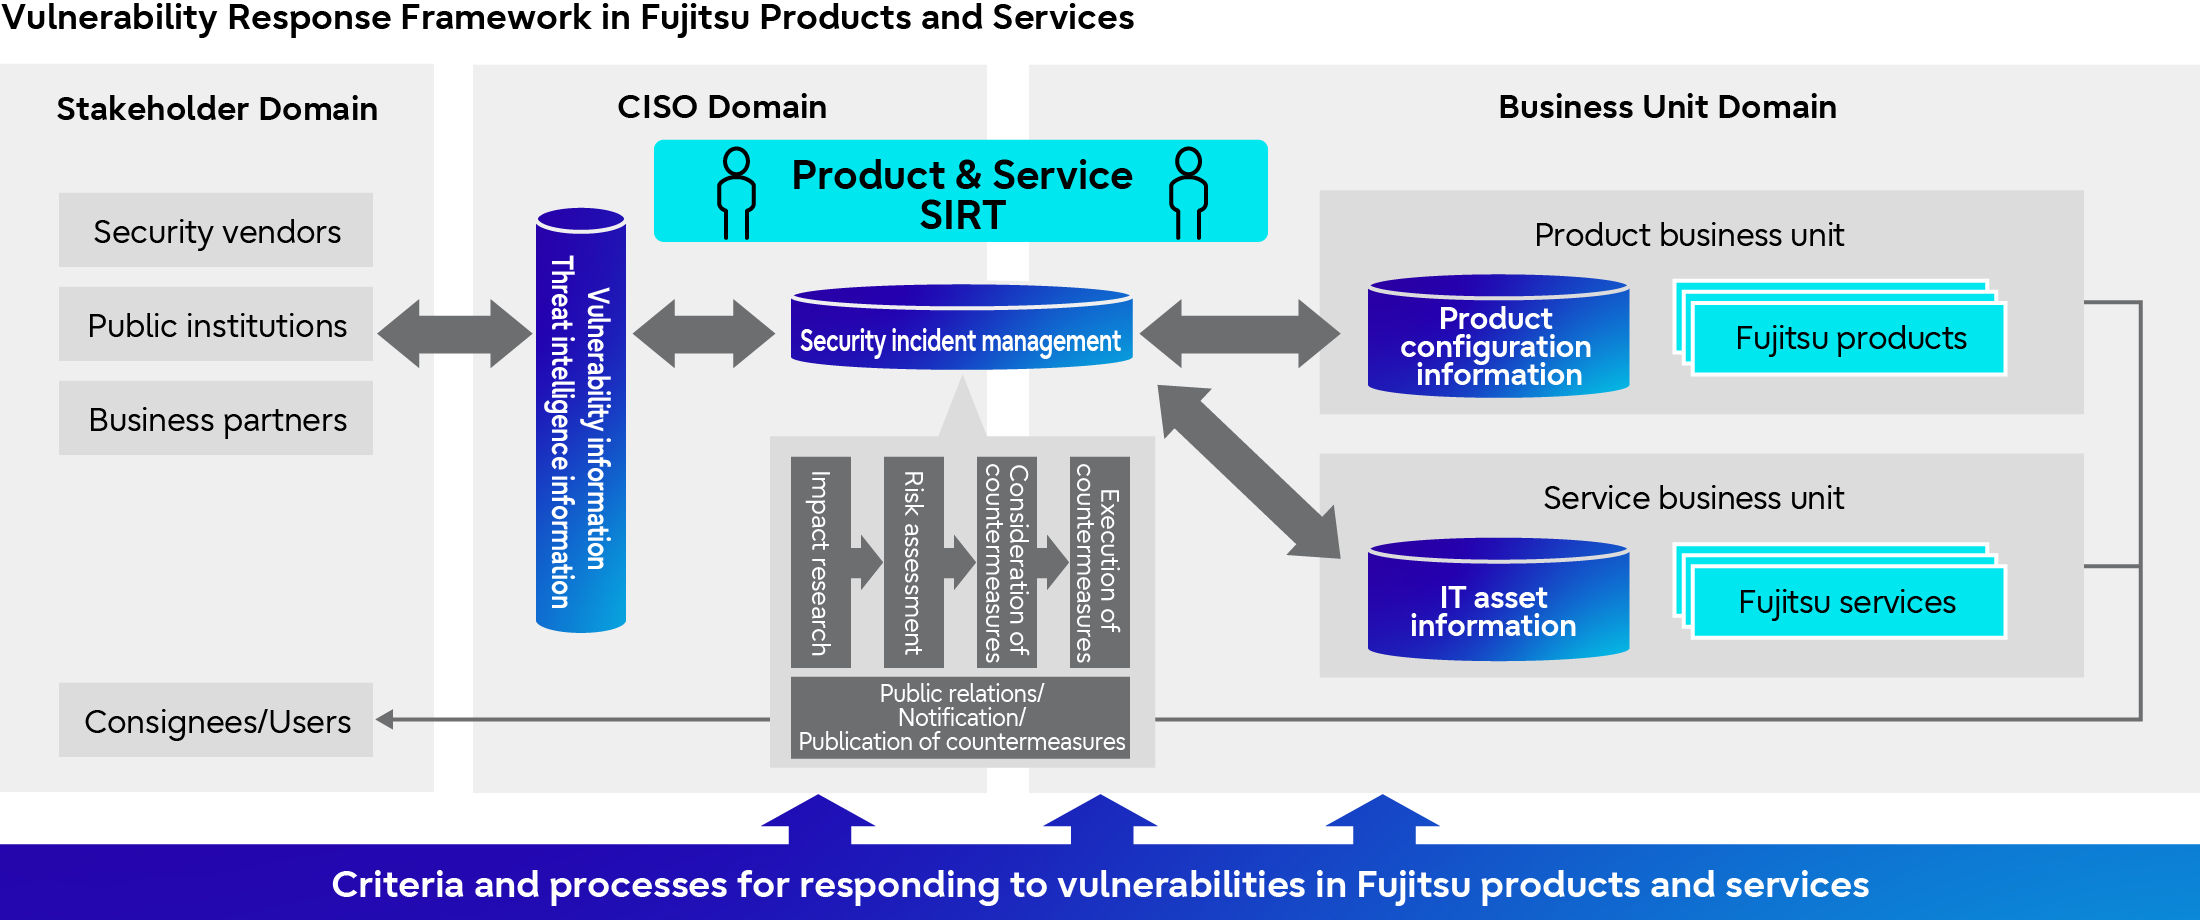 Vulnerability Response Framework in Fujitsu Products and Services